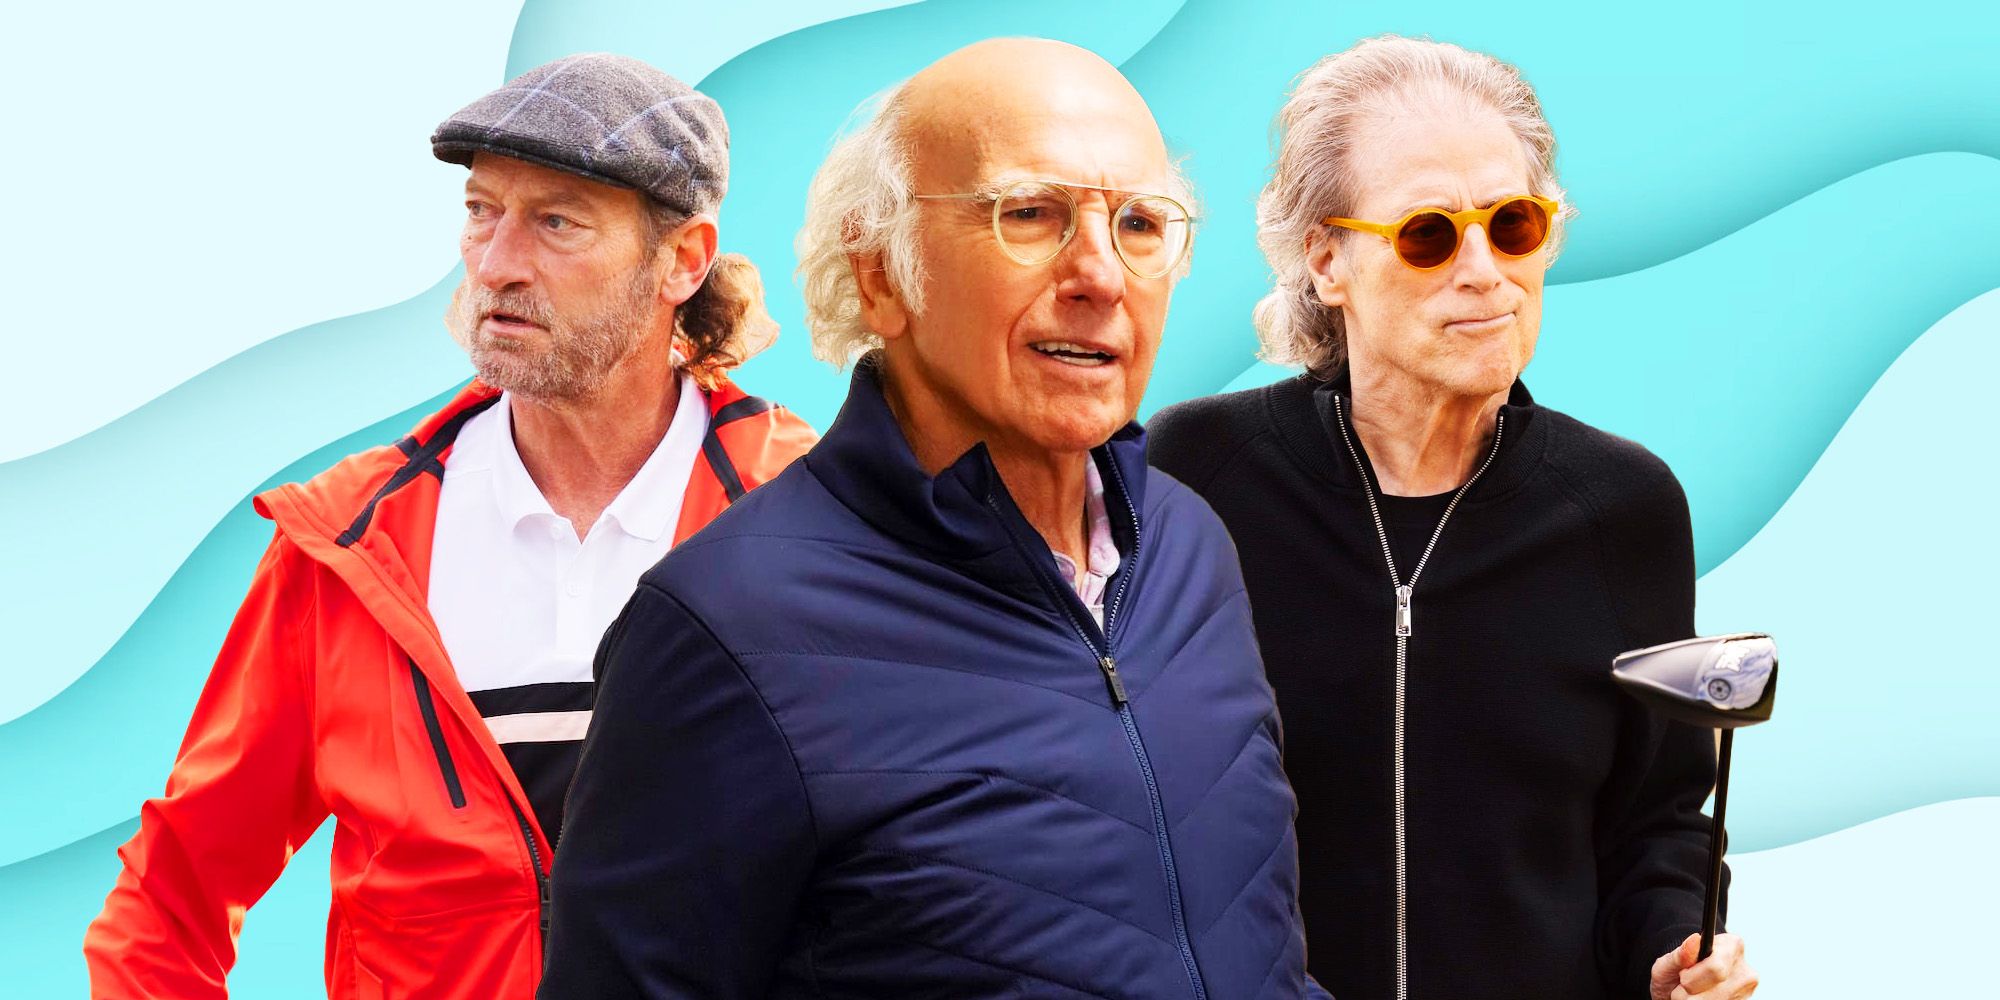 Larry David and cast from Curb Your Enthusiasm Season 12 Episode 3